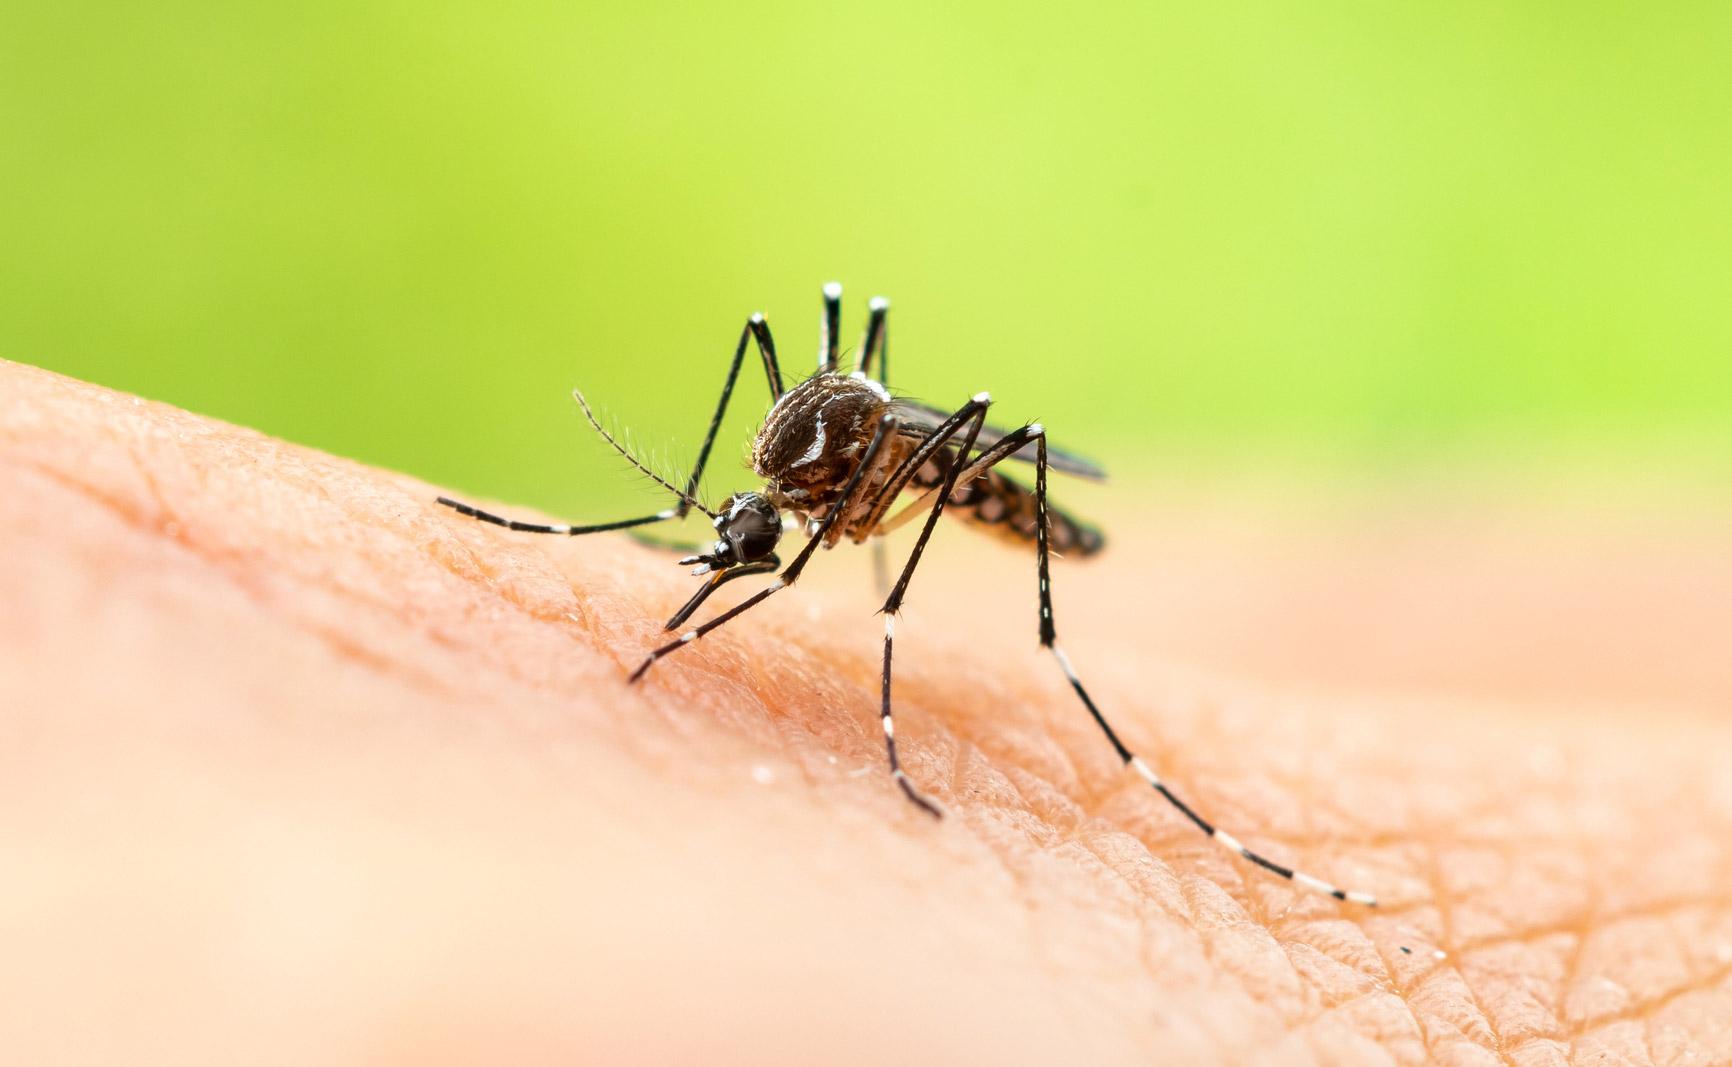 THD’s Mosquito Surveillance Program Detects Mosquitoes Carrying West Nile Virus